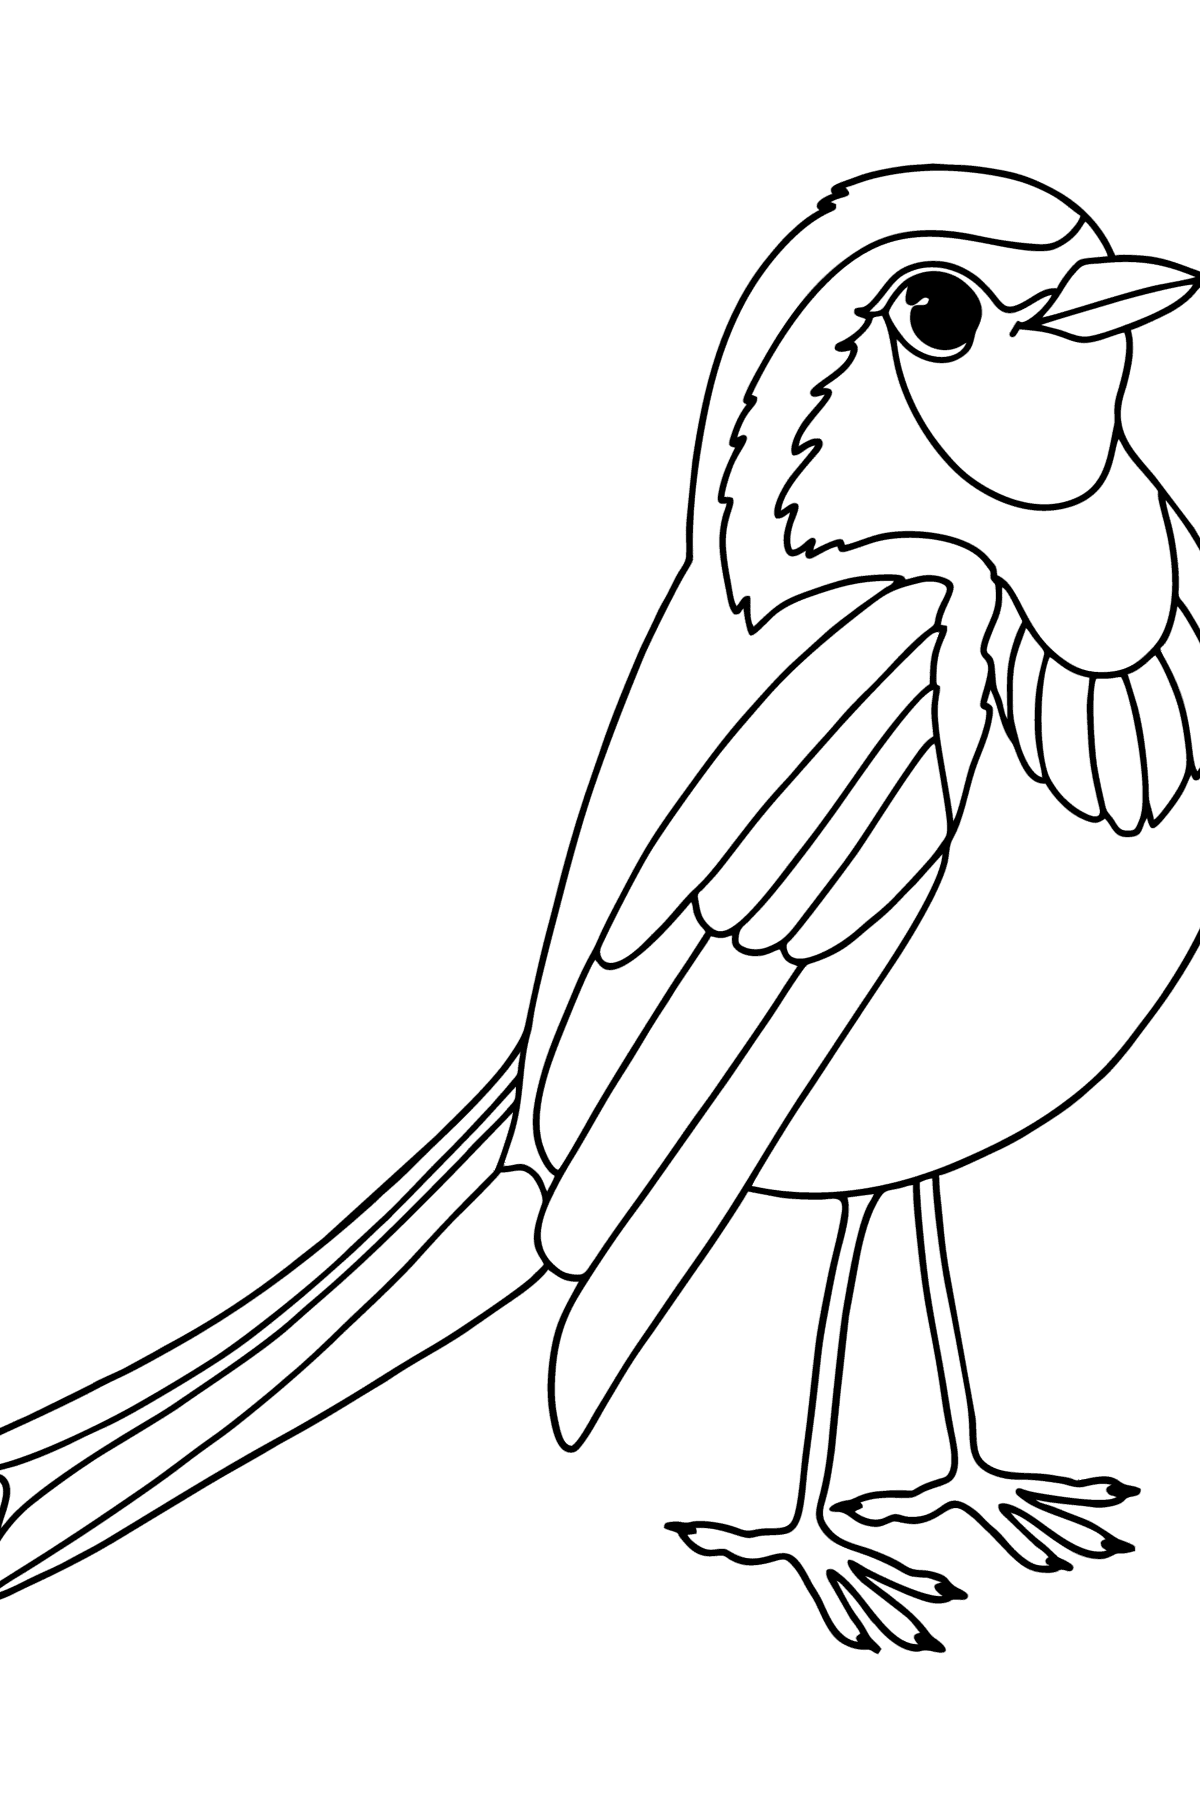 Bird finch сoloring page - Coloring Pages for Kids